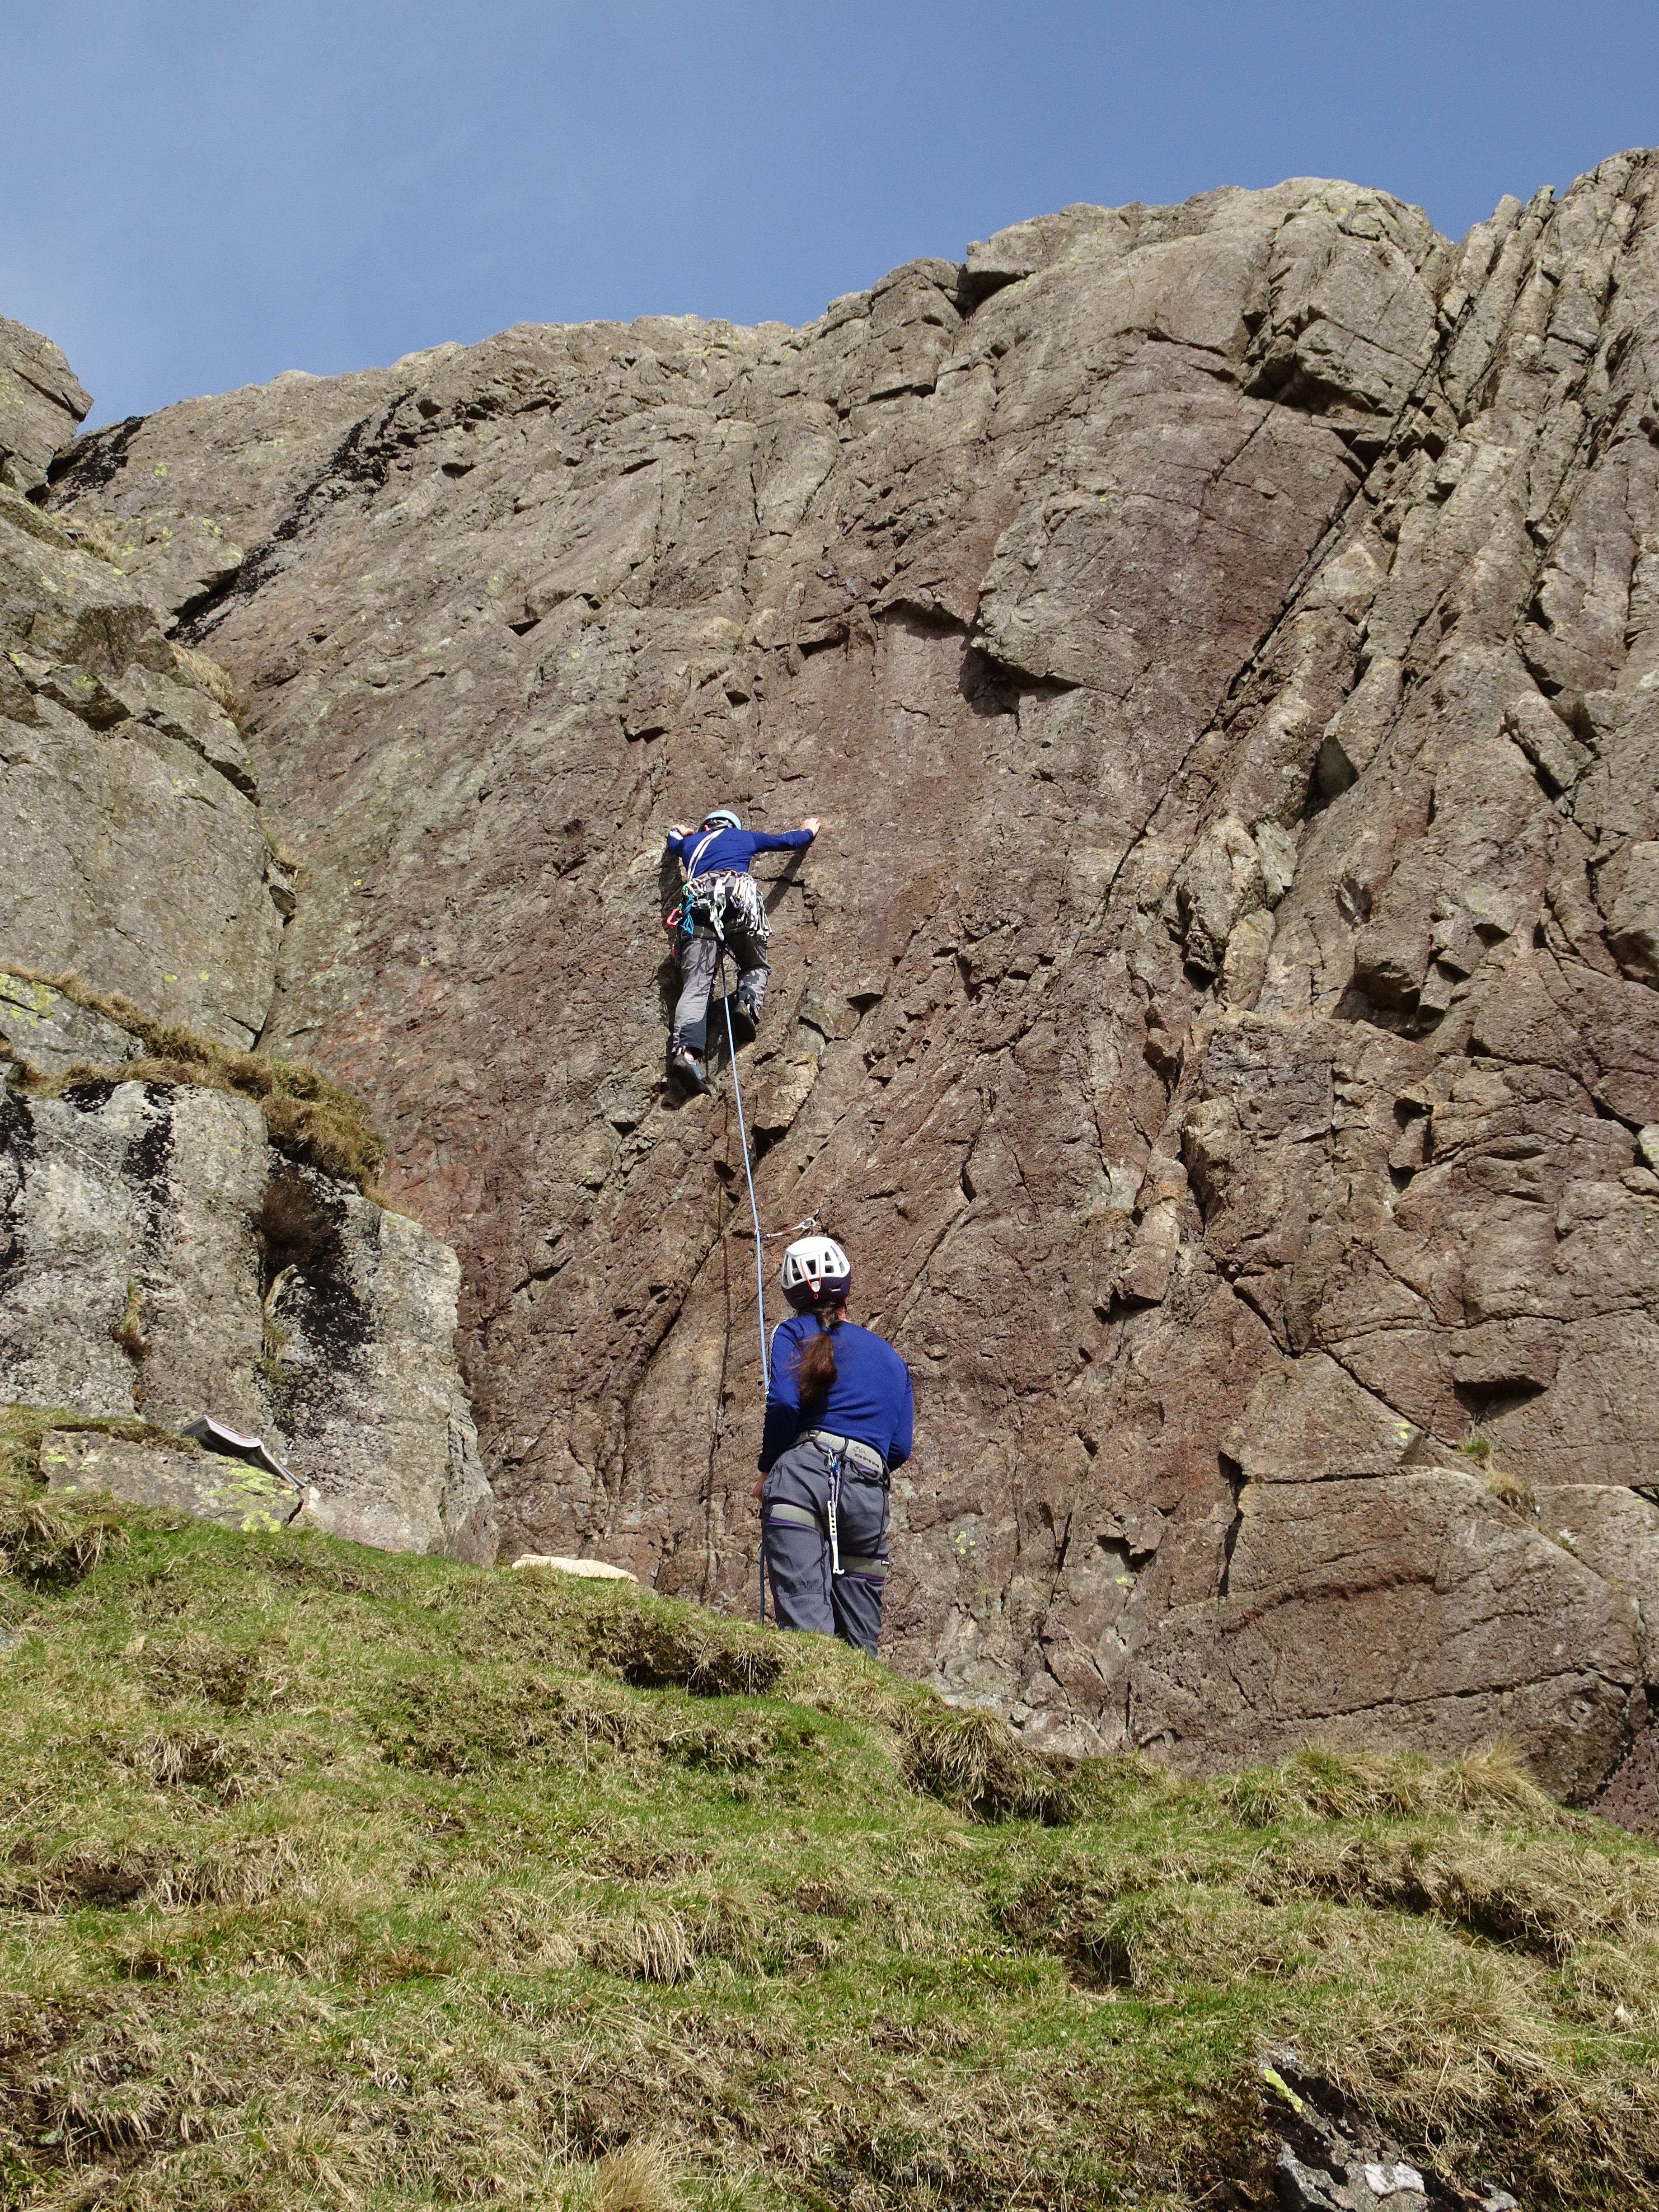 Lead climbing on trad routes